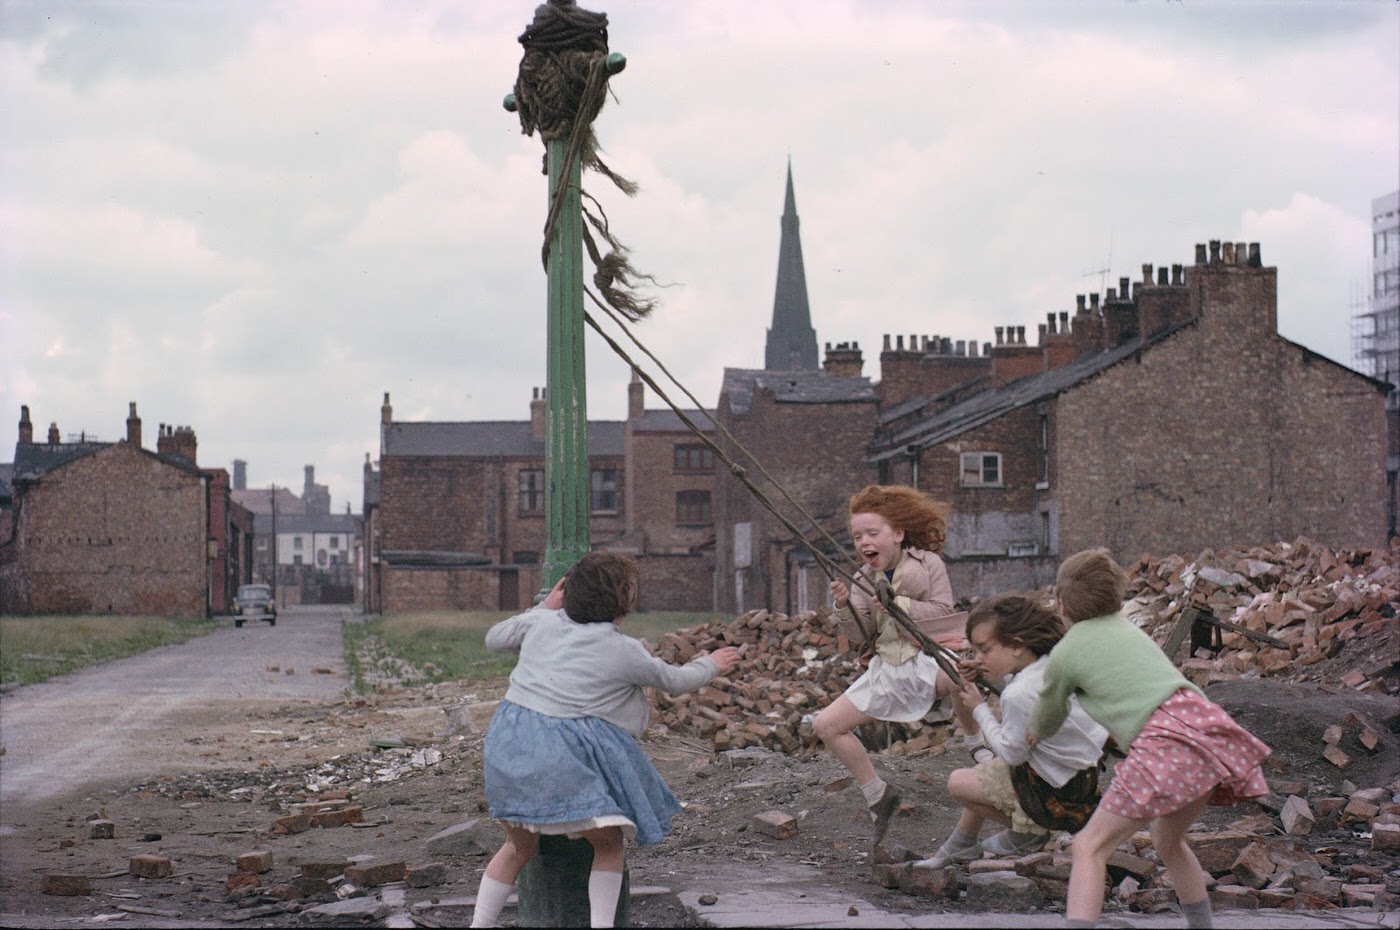 The Life of Manchester Slums in the 1960s by Shirley Baker